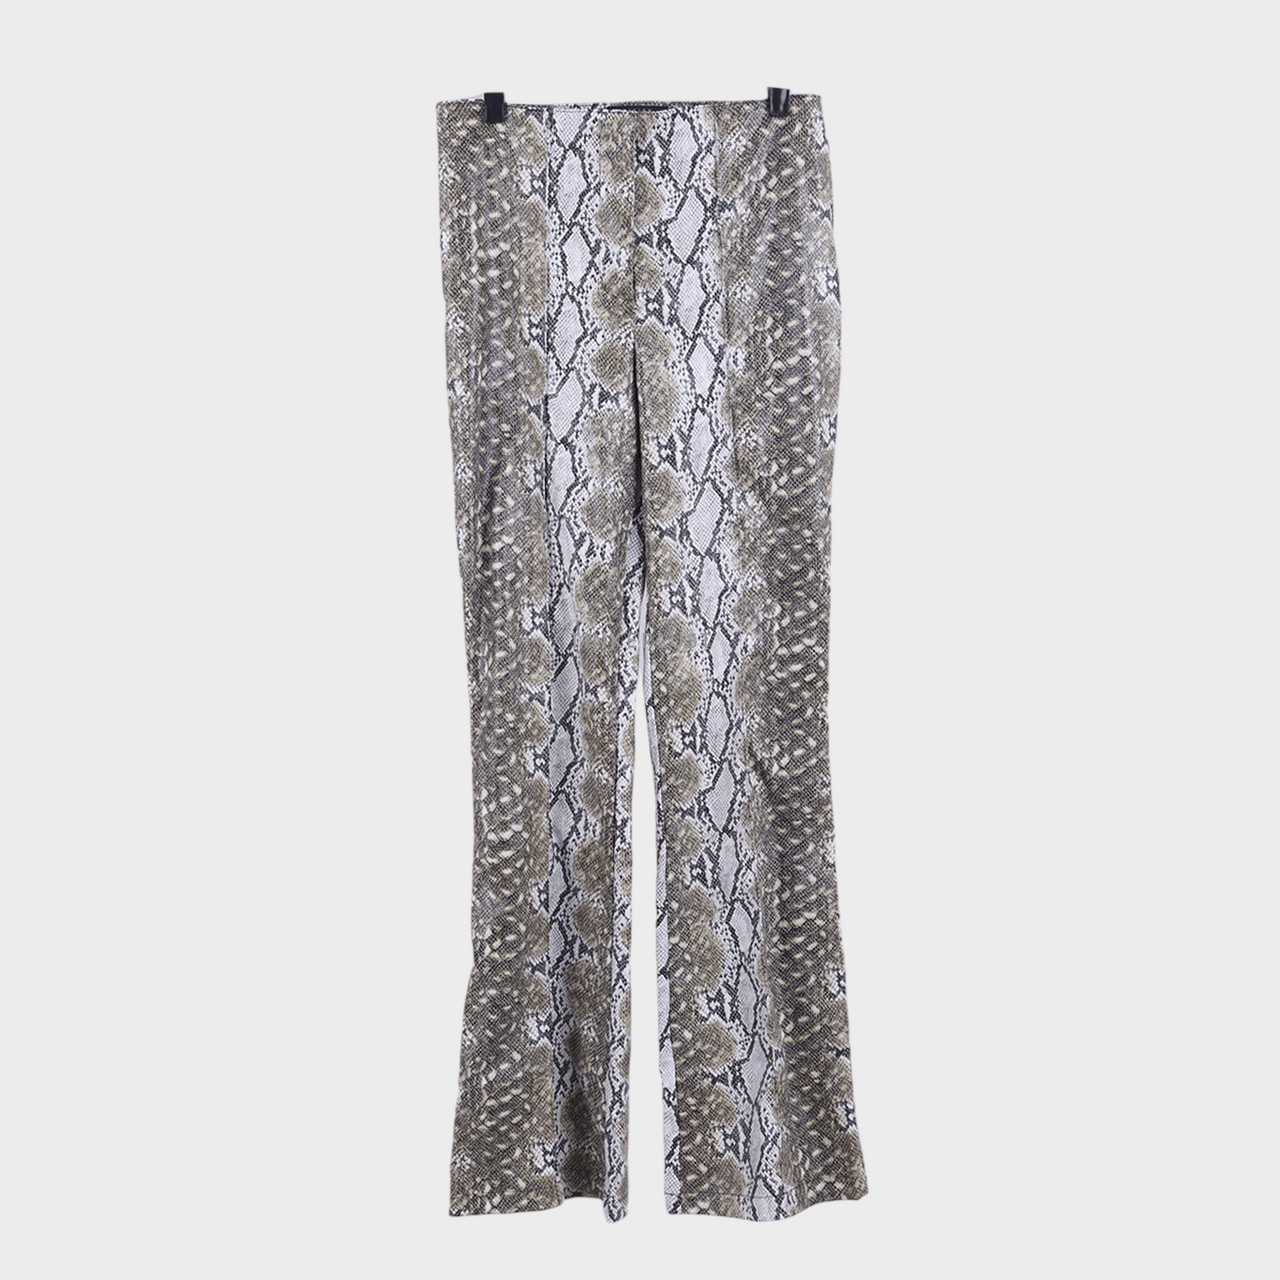 Asos Design Leather Look Flare Trouser in Snake Print